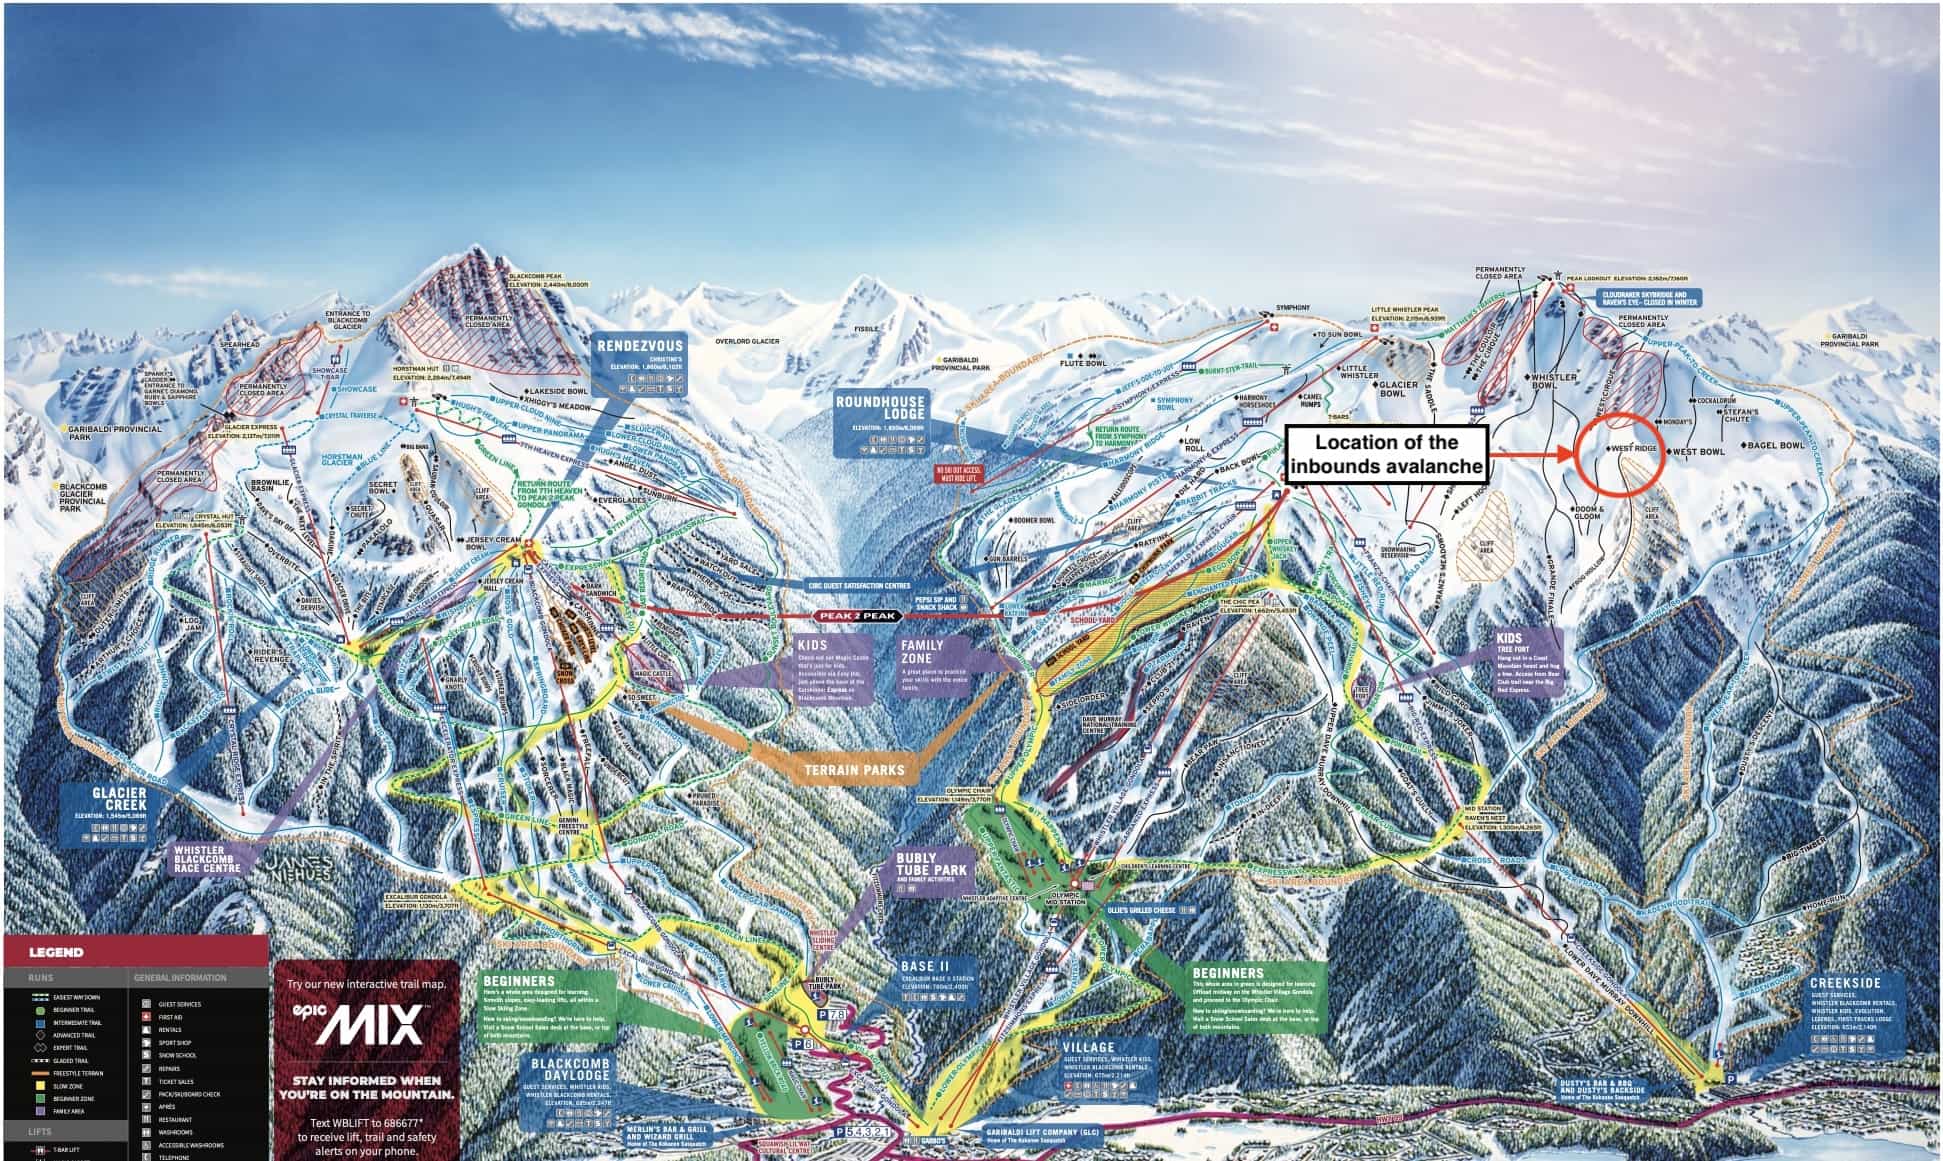 Whistler Blackcomb, trail map, inbounds avalanche